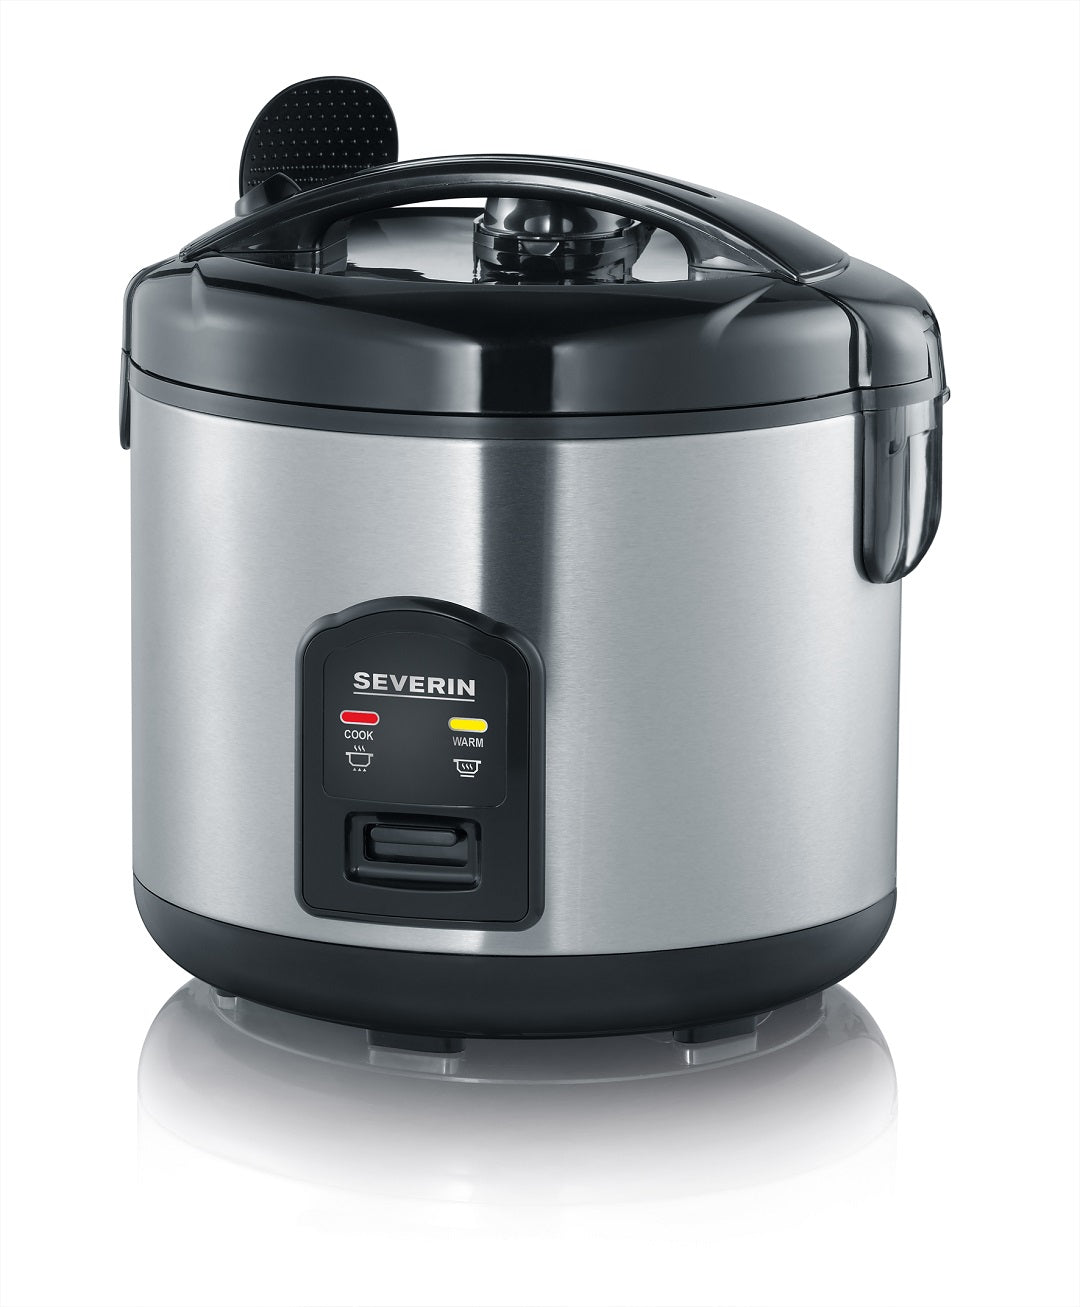 Solis Rice Cooker Duo Program - Type 817 - Rice Cooker - Silver